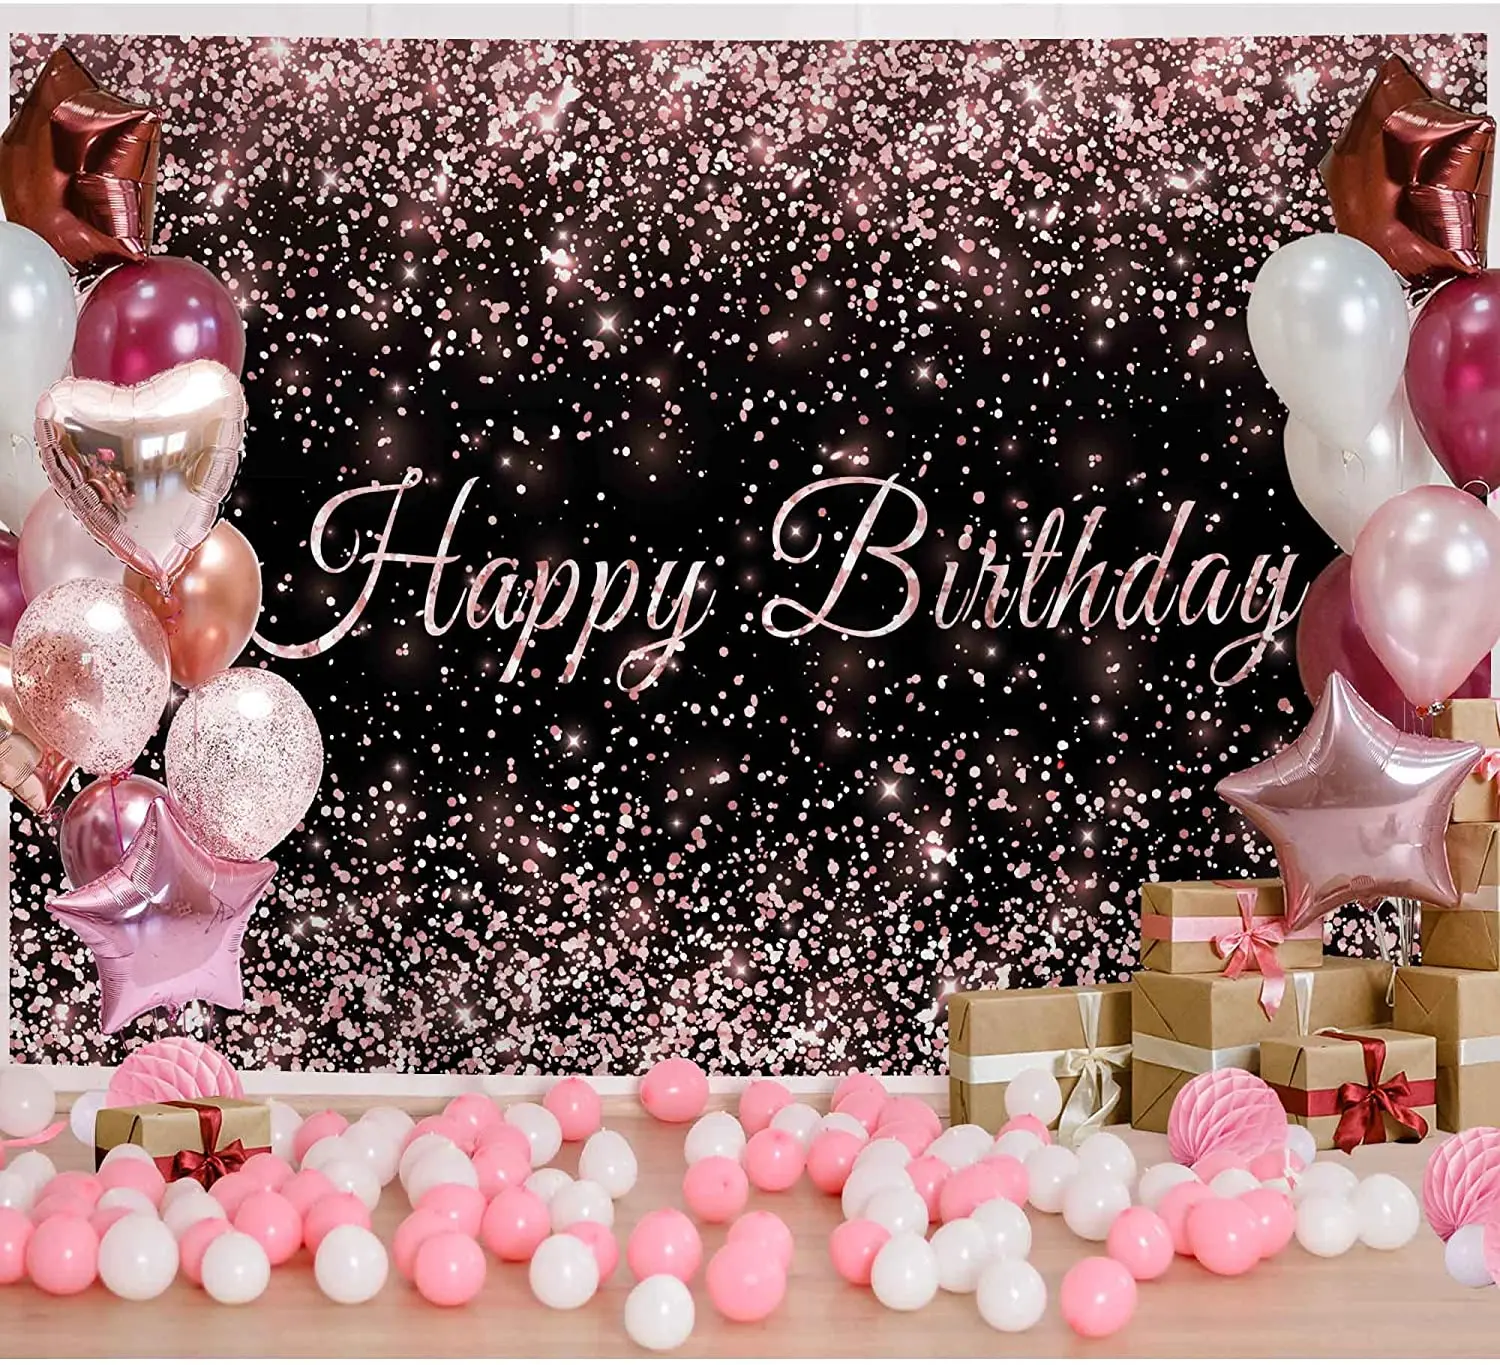 7x5 Feet Happy Birthday Background Pink And Black Shiny Gold Dots Glamour  Glitter Sweet Photography Background Kids Adult - Buy Happy Birthday  Background,Pink And Black Shiny Gold Dots Glamour Glitter Sweet Photography